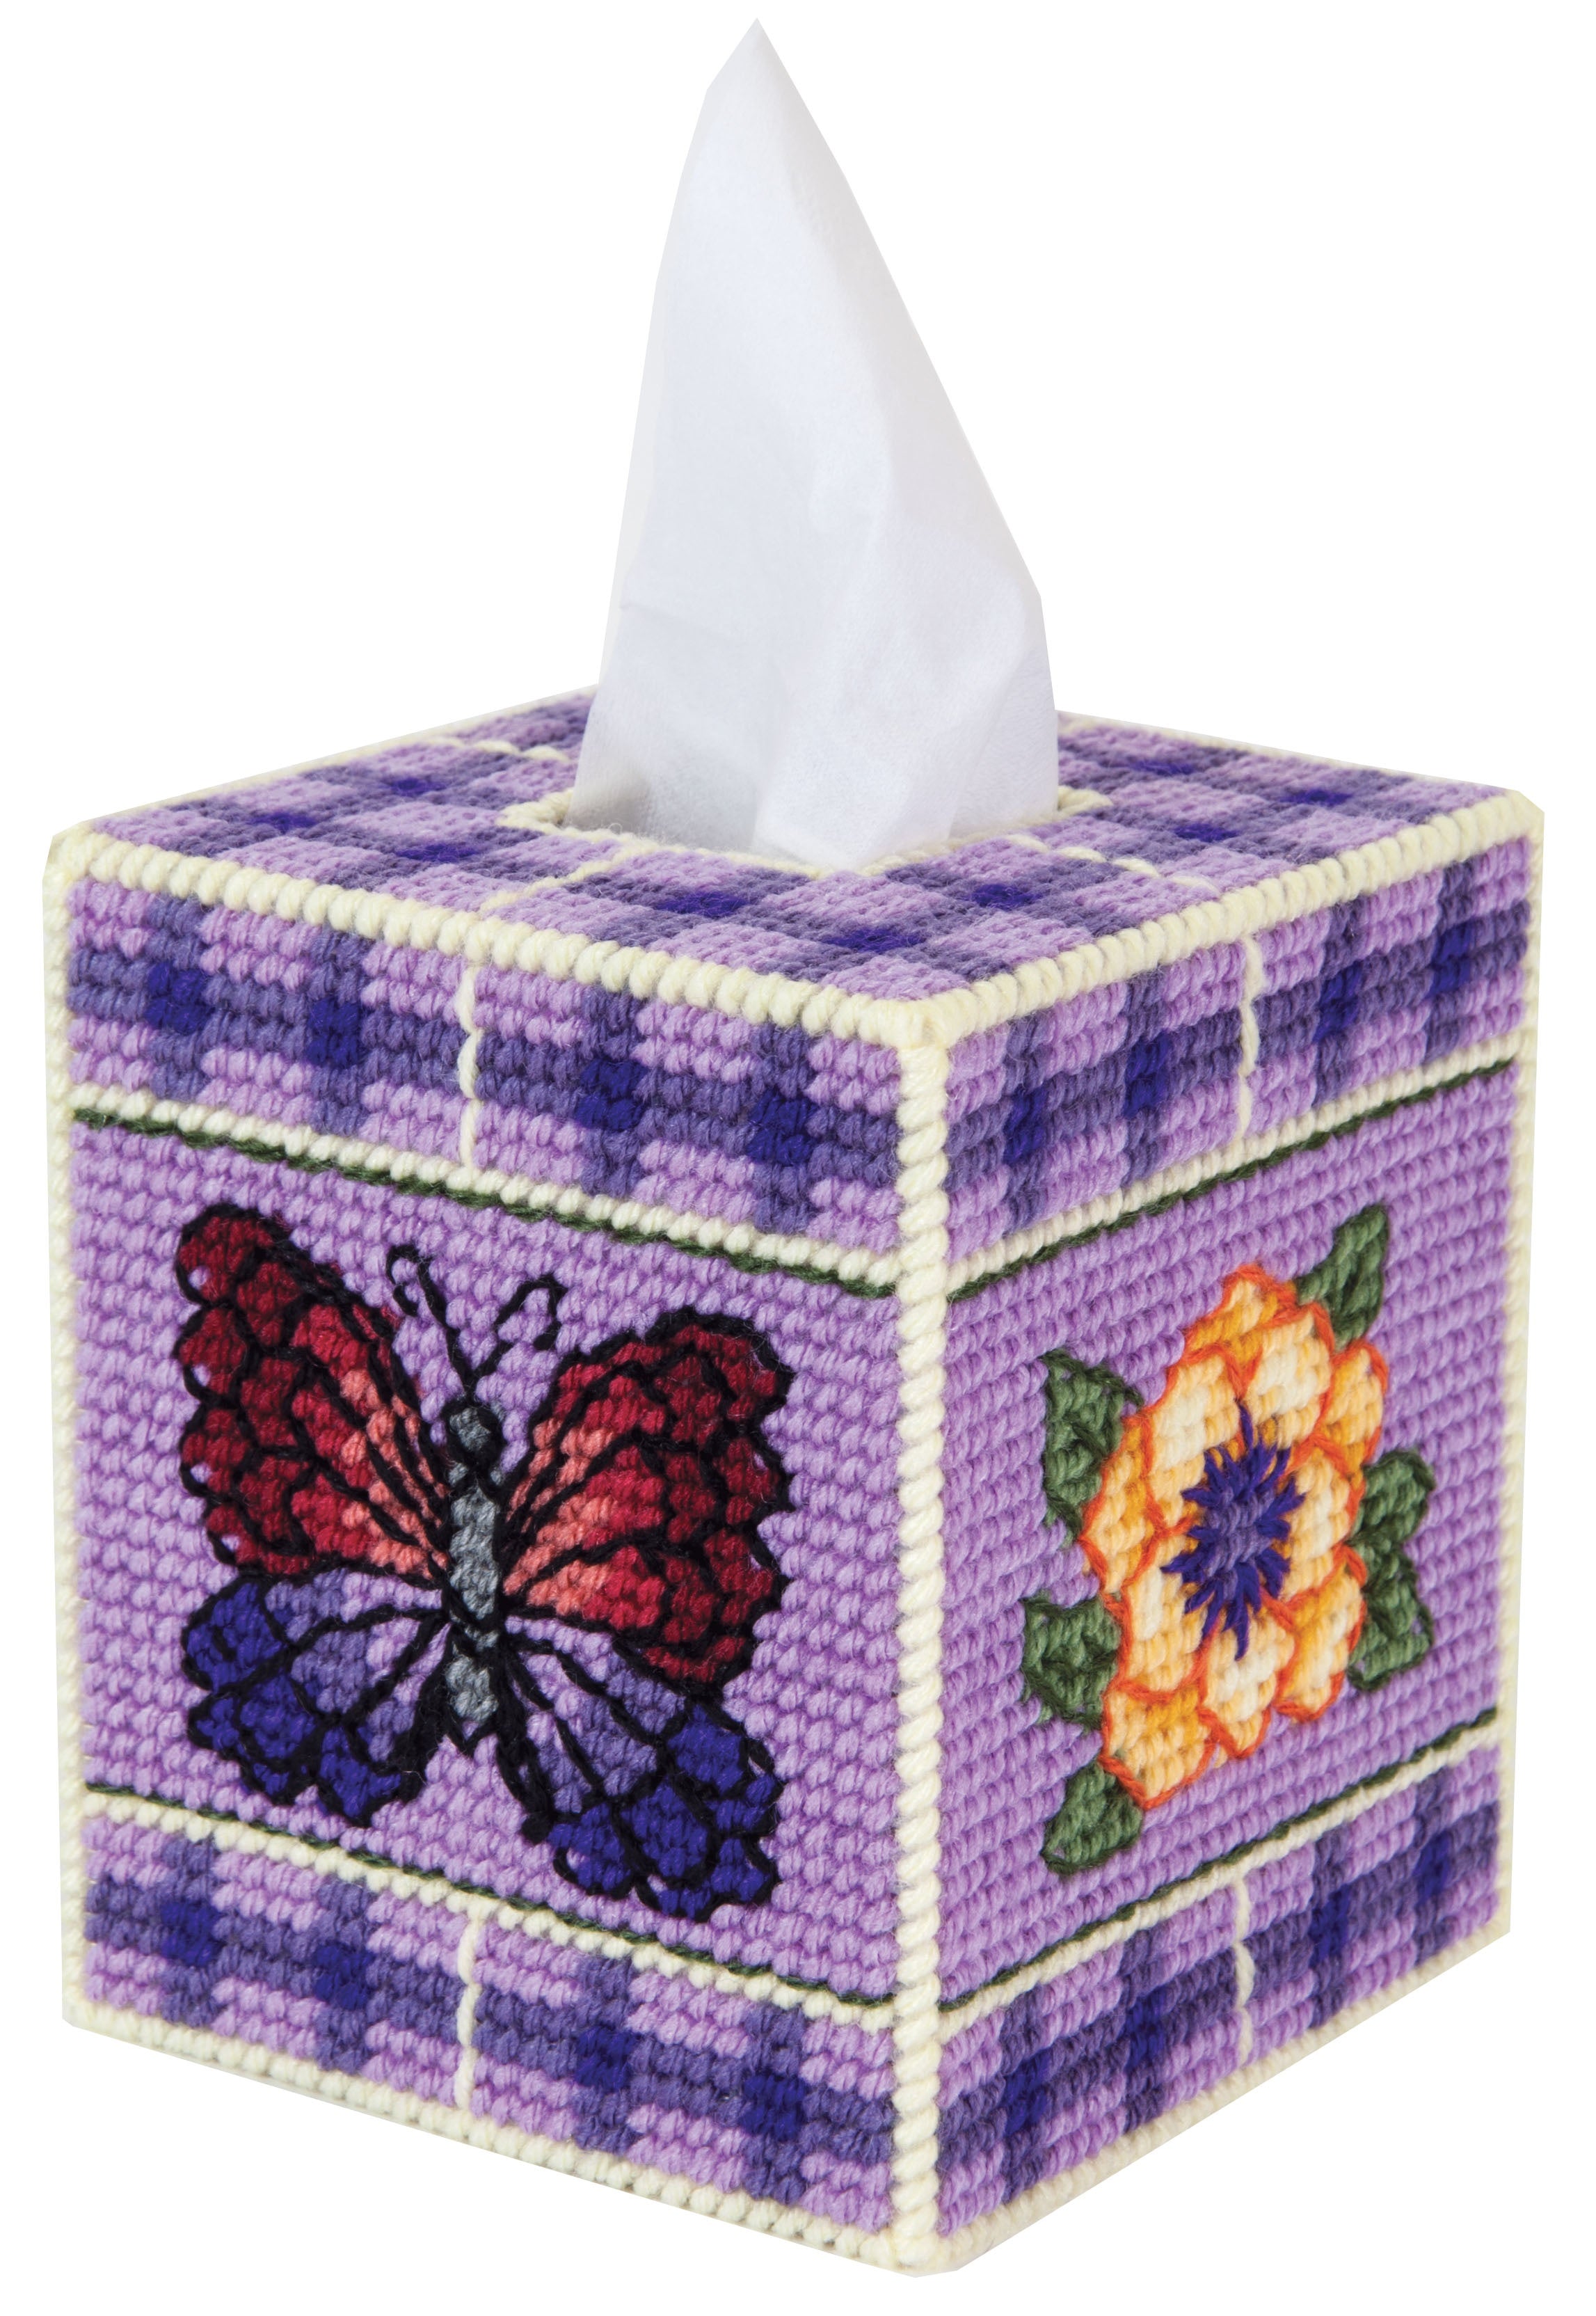 Plastic Canvas Tissue Box Cover Kit. This Design features Butterfies and flowers with a purple background.